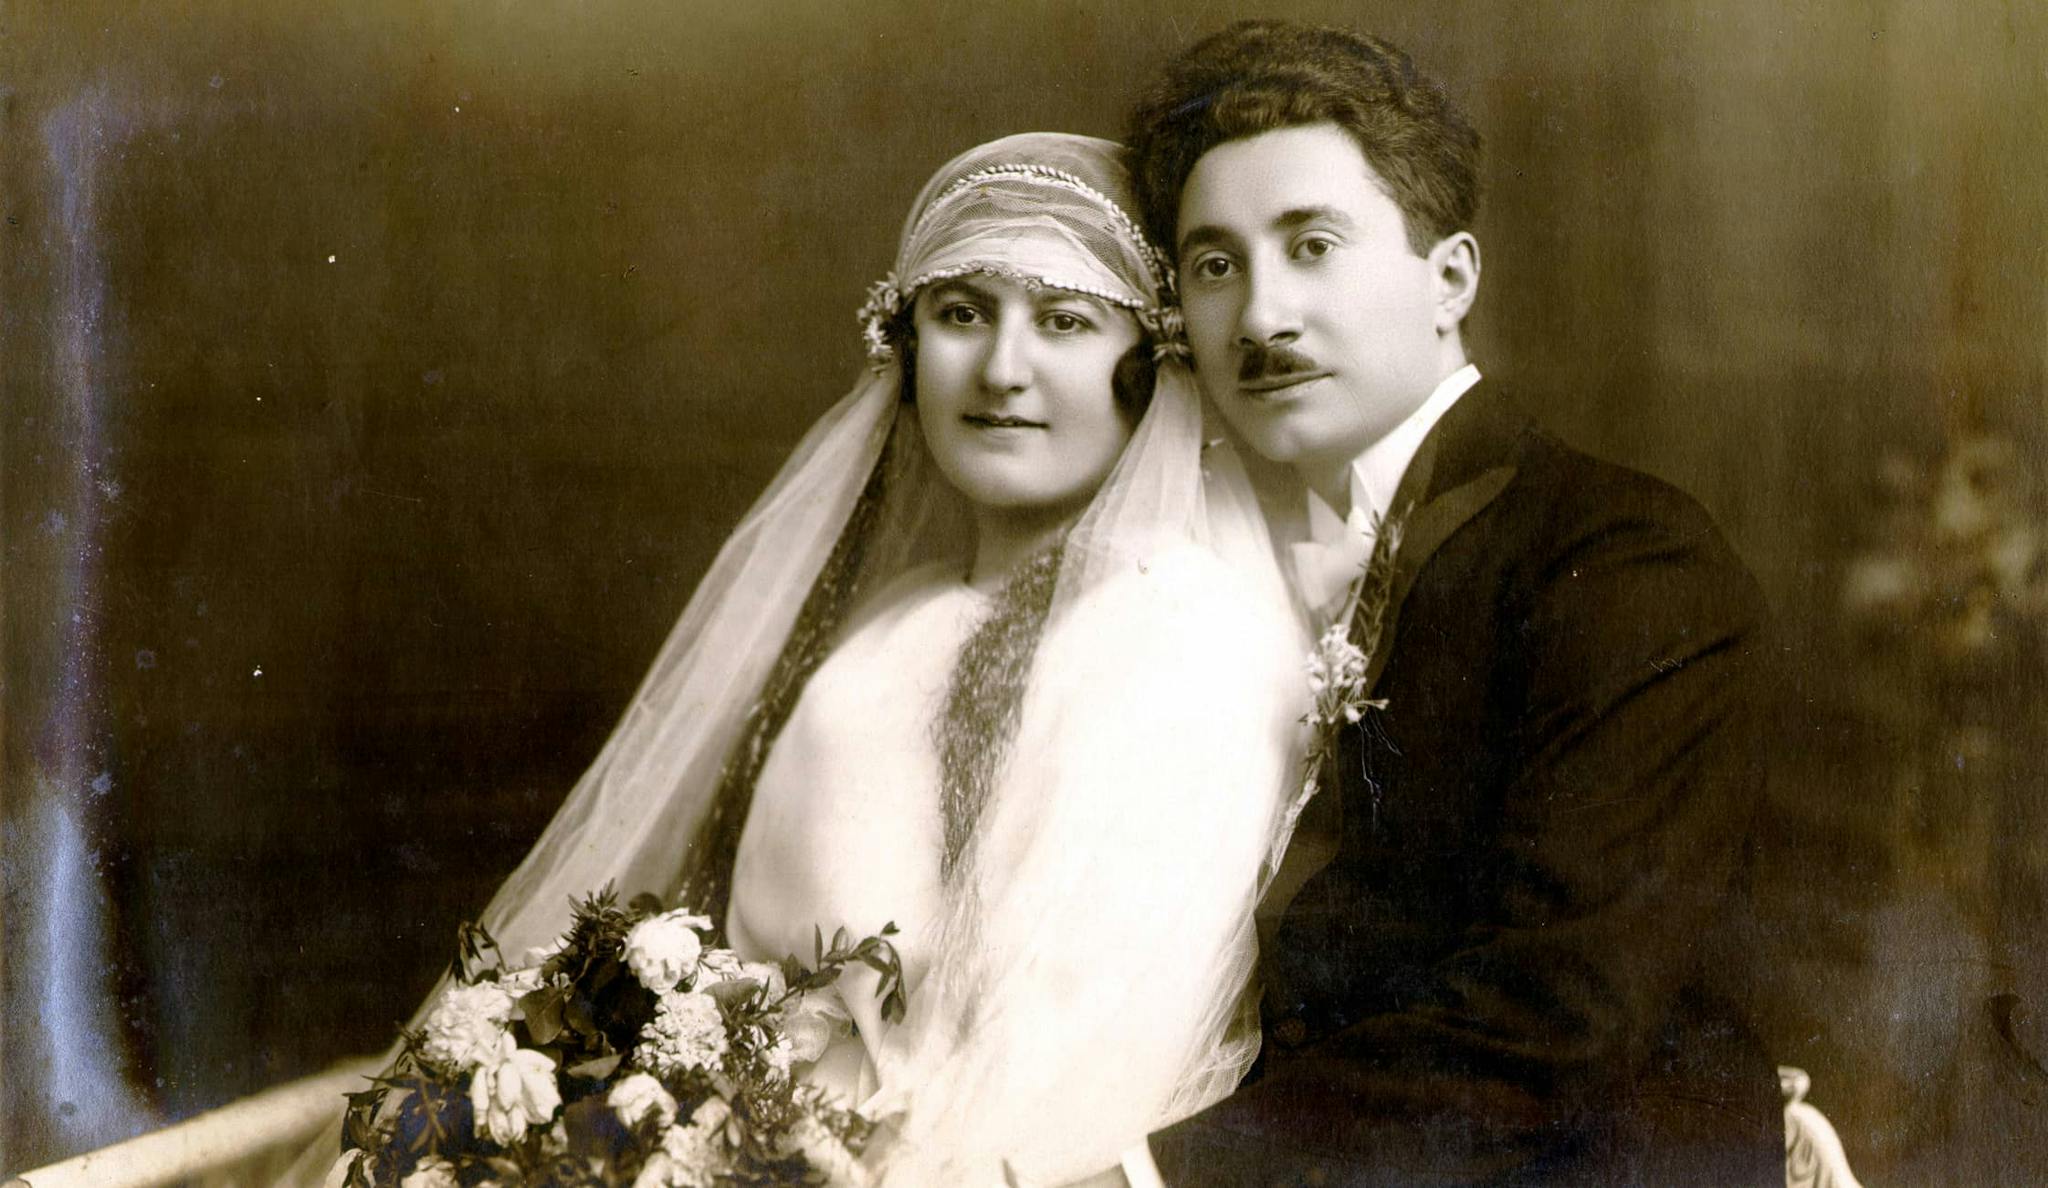 The Kalefs were one of the Belgrade's oldest families, tracing their roots back more than 300 years. Then the Nazis swept into Serbia in 1941... While scores of relatives were...